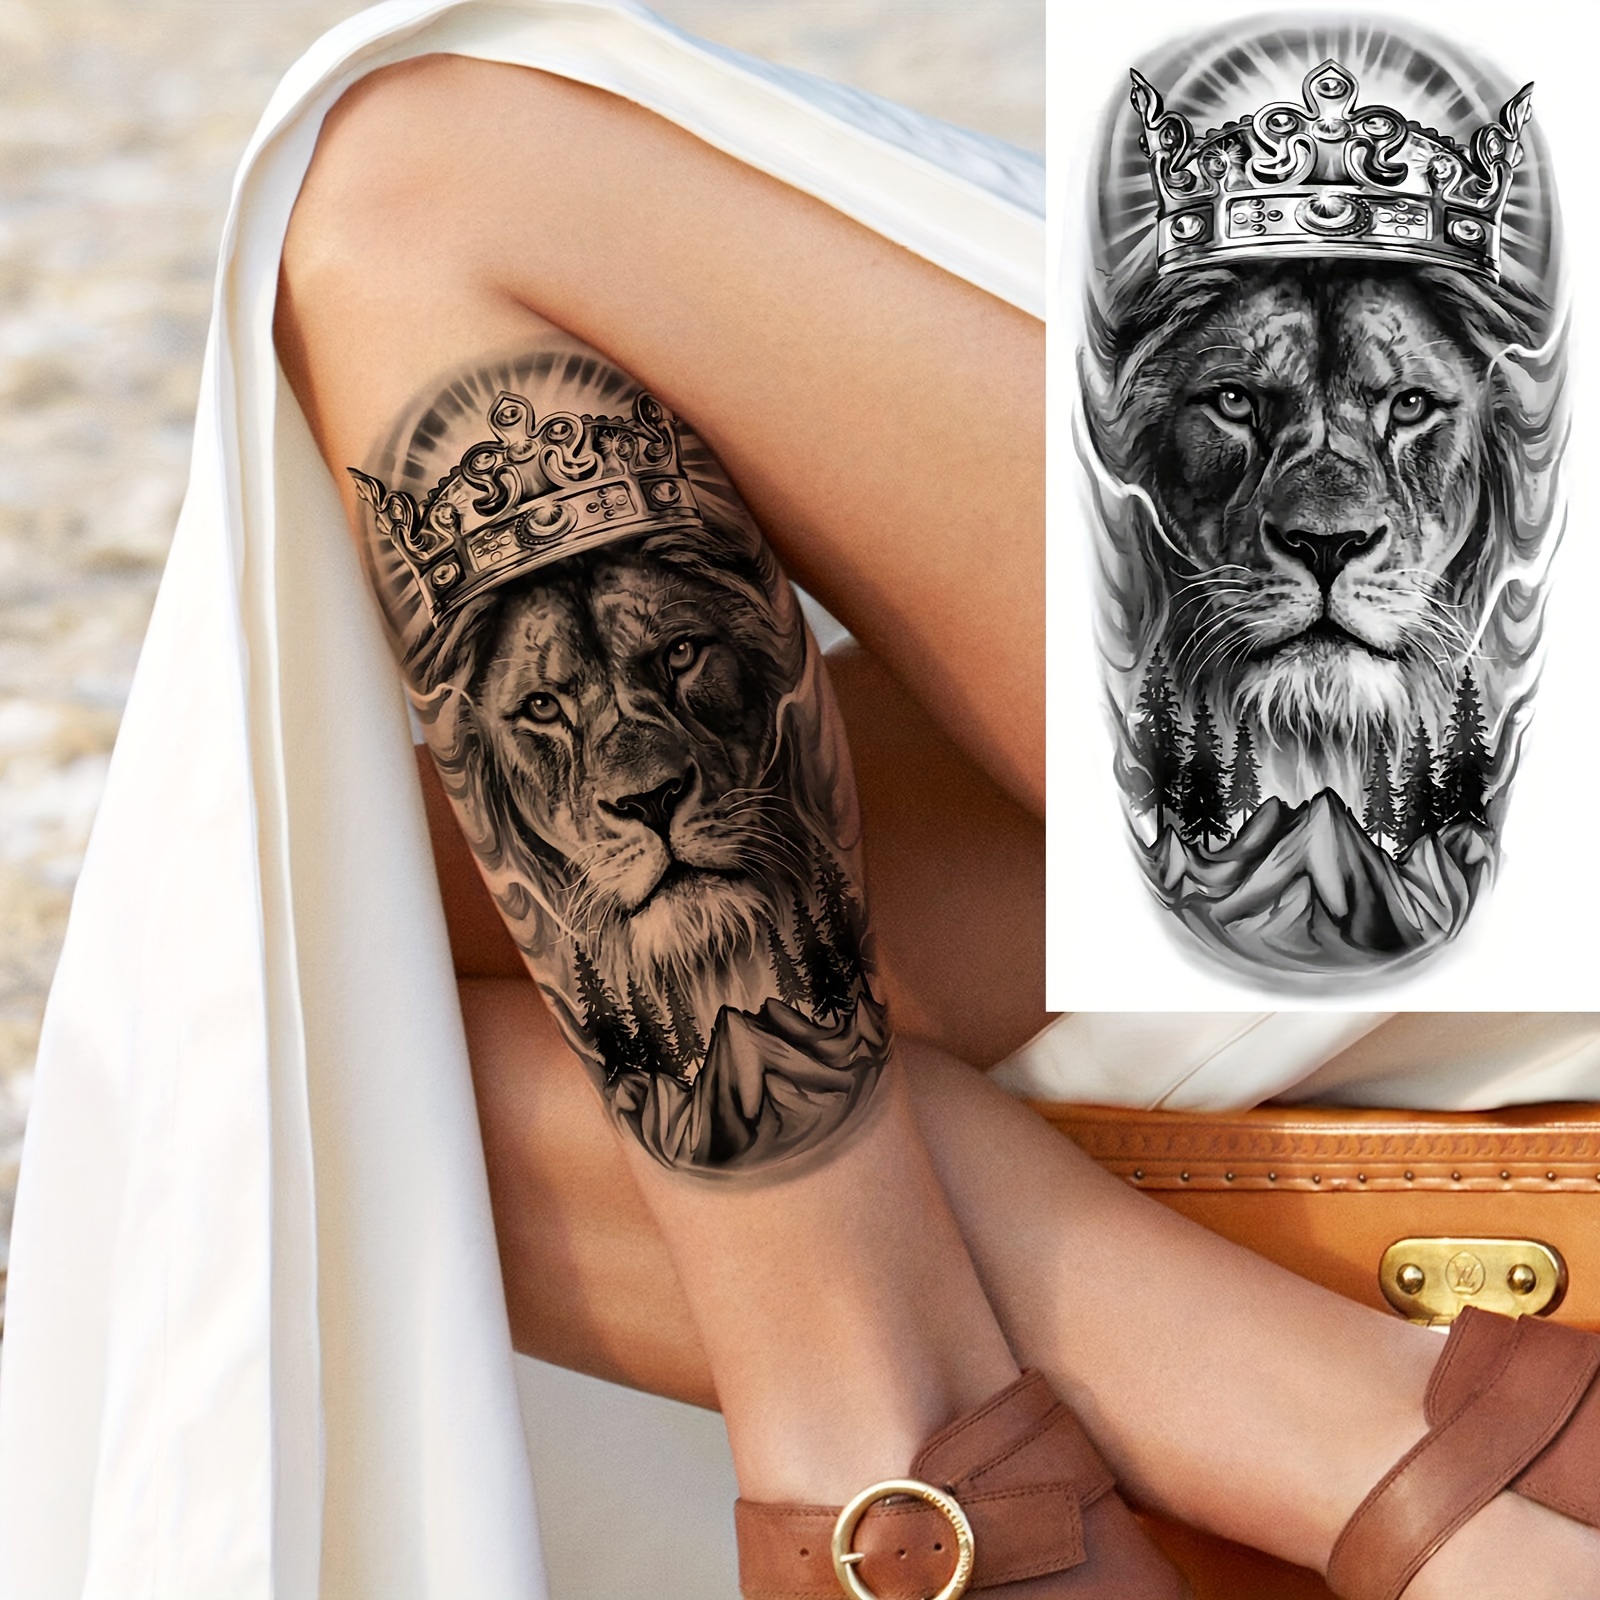 

dramatic" Large Black Lion King Temporary Tattoo Sticker - Realistic Forest Tribal Design, Waterproof & Long-lasting Body Art For Men And Women